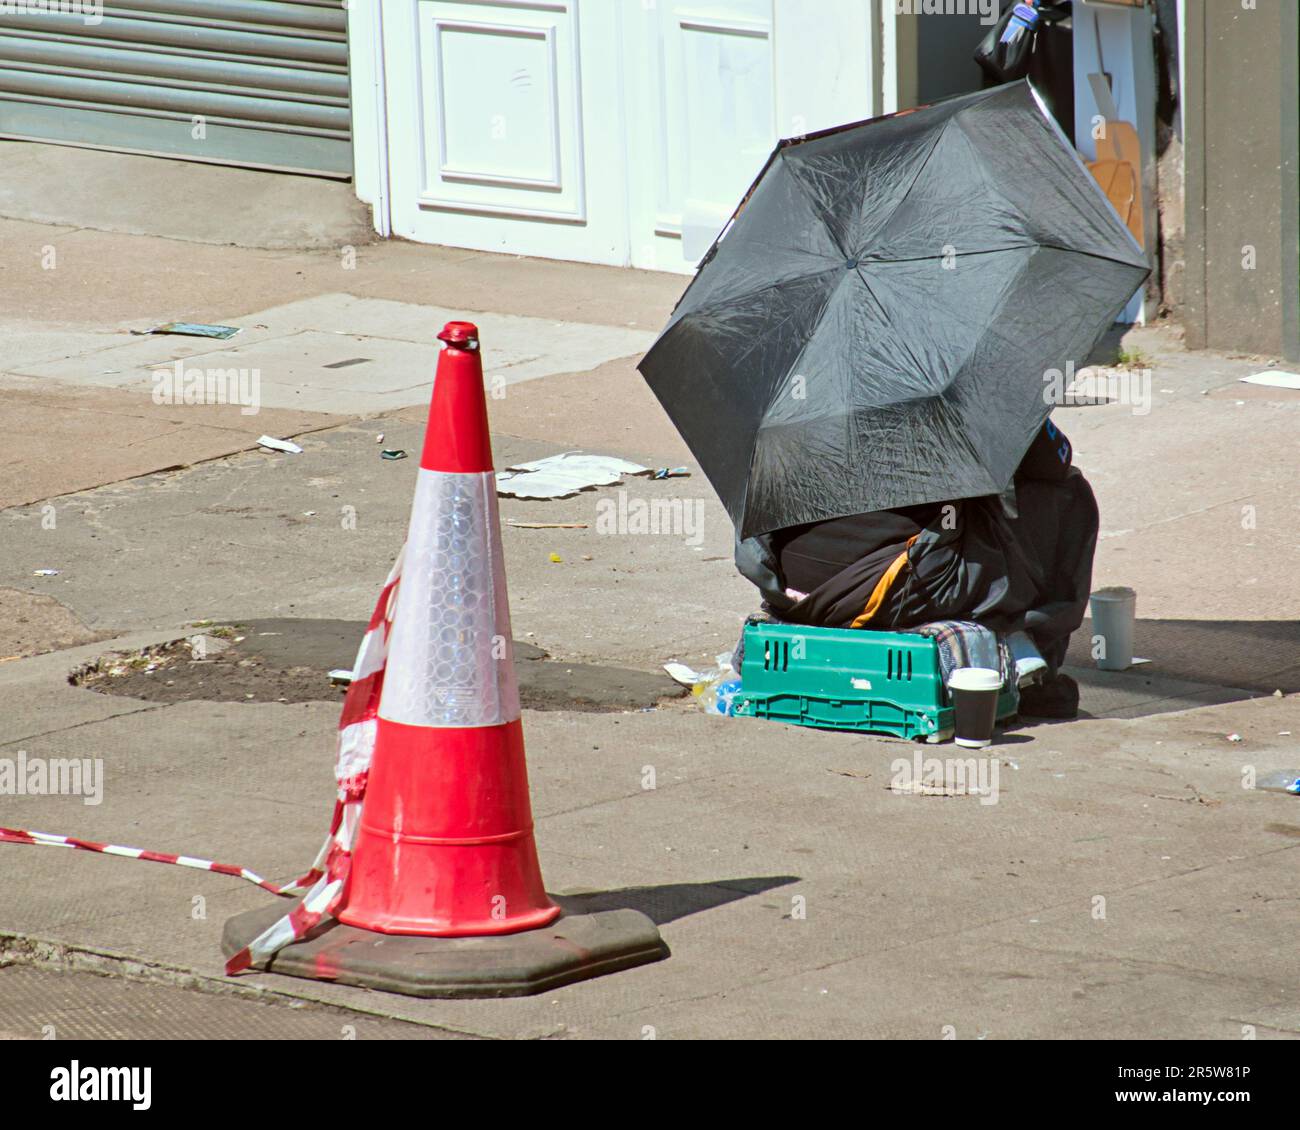 homeless begging with an umbrella as a parasol with the iconic symbol of the city a traffic cone Stock Photo